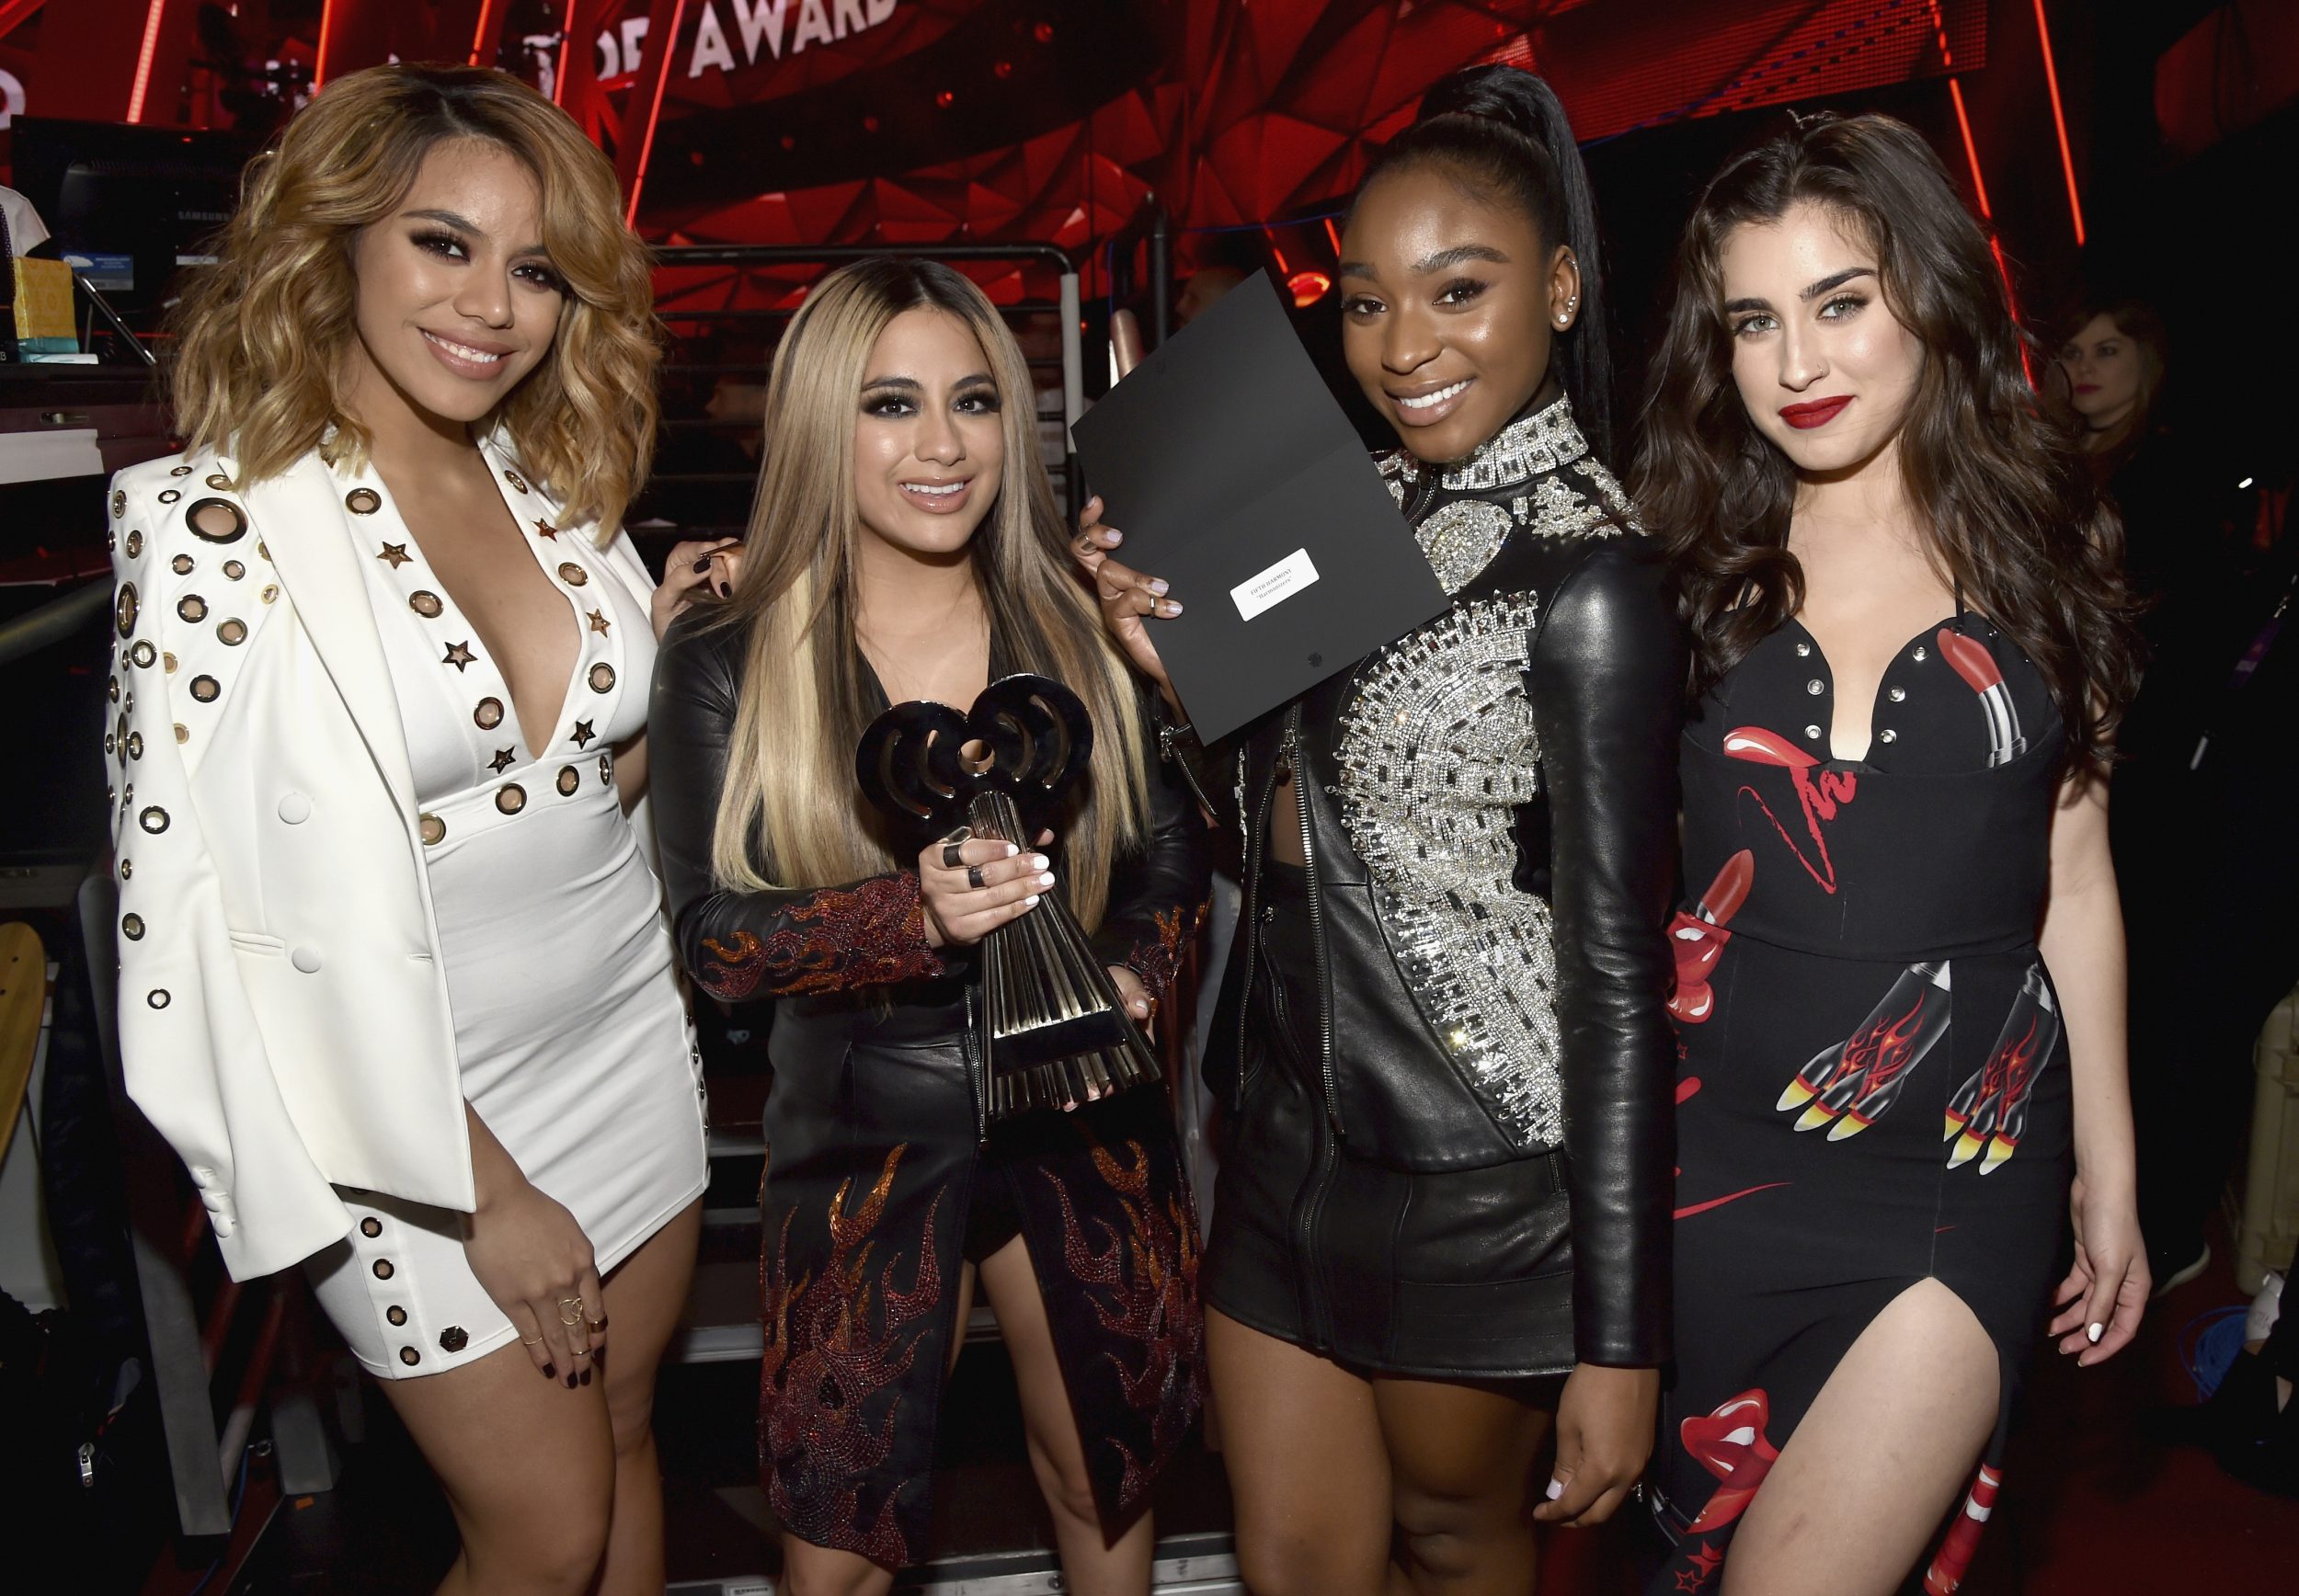 INGLEWOOD, CA - MARCH 05: Singing group Fifth Harmony poses backstage at the 2017 iHeartRadio Music Awards which broadcast live on Turner's TBS, TNT, and truTV at The Forum on March 5, 2017 in Inglewood, California. (Photo by Frazer Harrison/Getty Images for iHeartMedia) *** Local Caption *** Normani Kordei; Ally Brooke; Lauren Jauregui; Dinah Jane